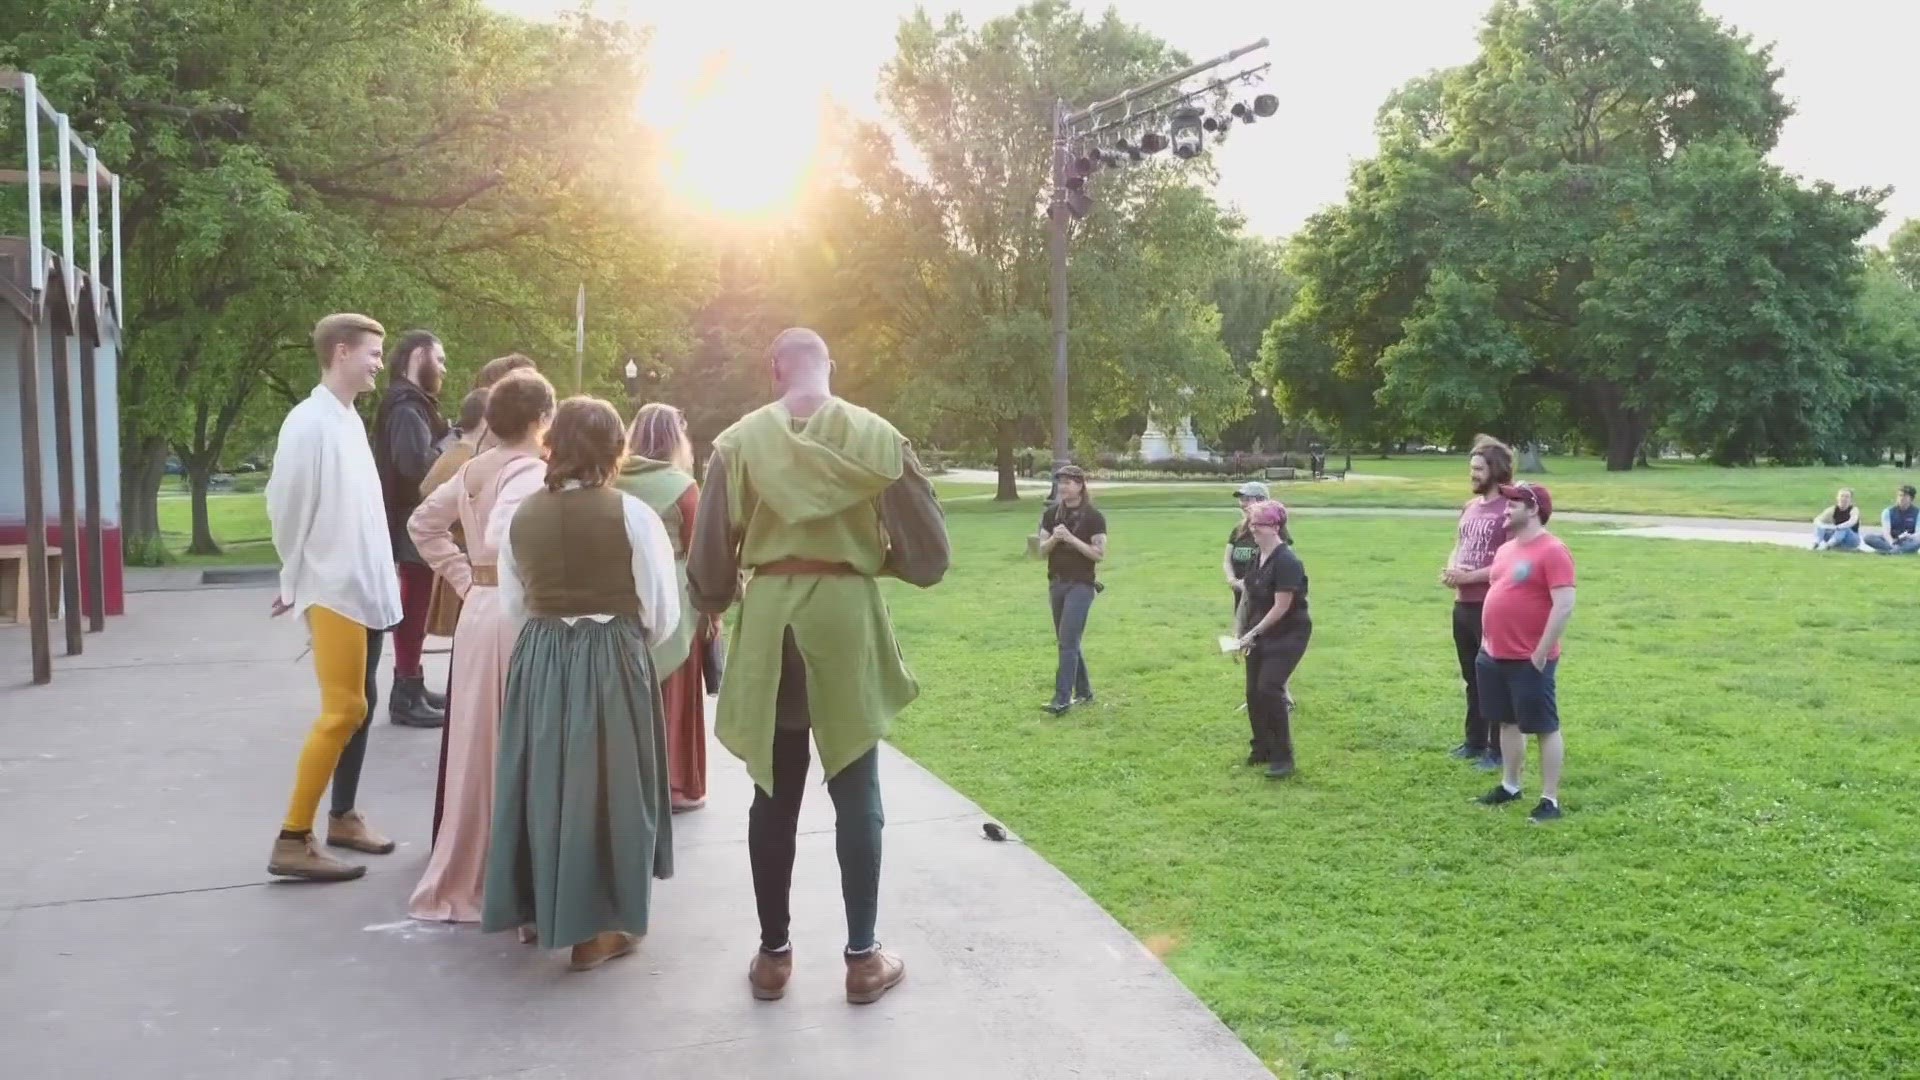 For their first show of the season, the group is bringing Sherwood Forest to Schiller Park with an all-new take on the adventures of Robin Hood.